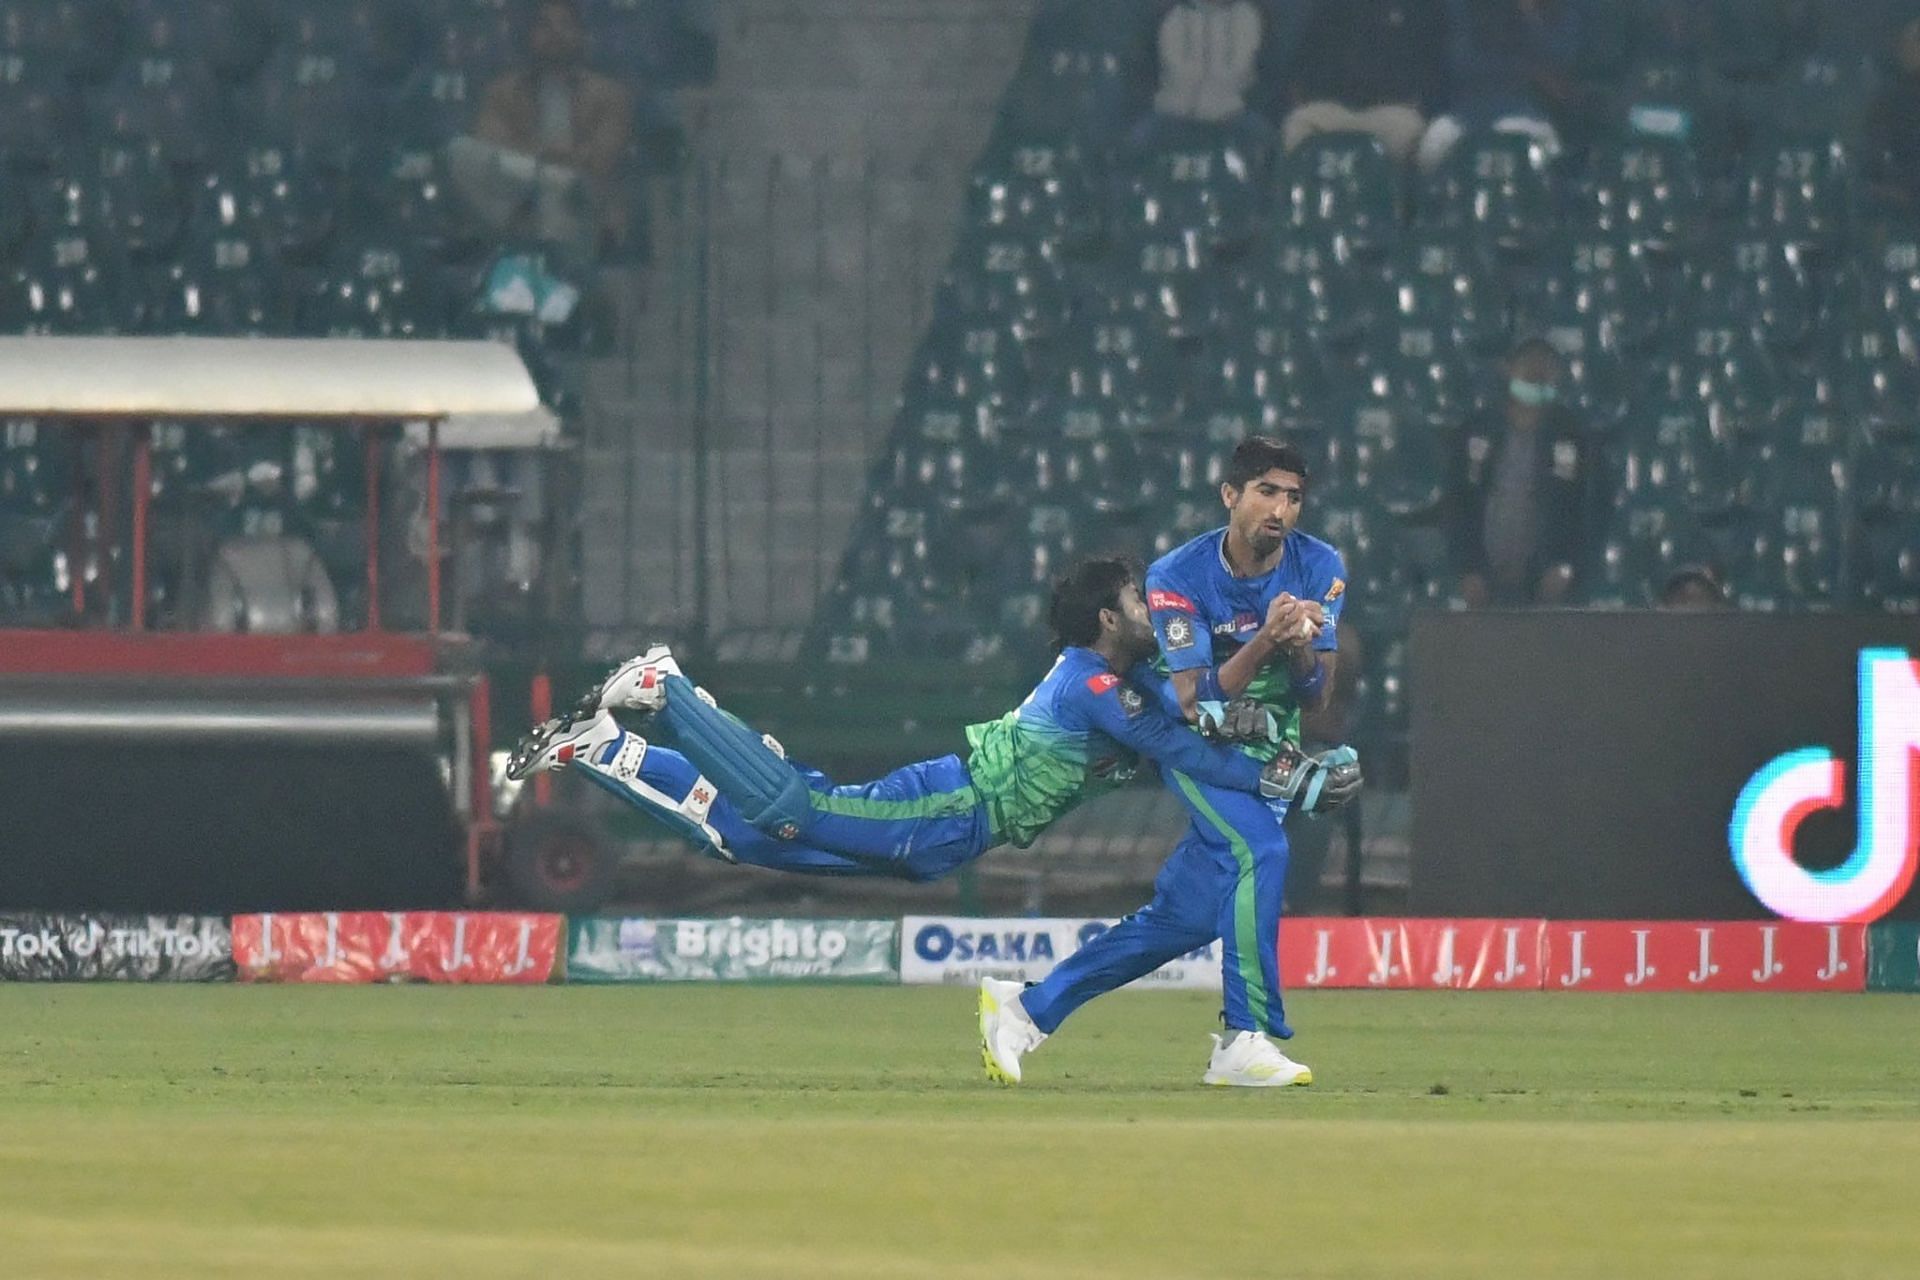 Mohammad Rizwan and Shahnawaz Dahani collides with each during a PSL game (Credit: PSL)